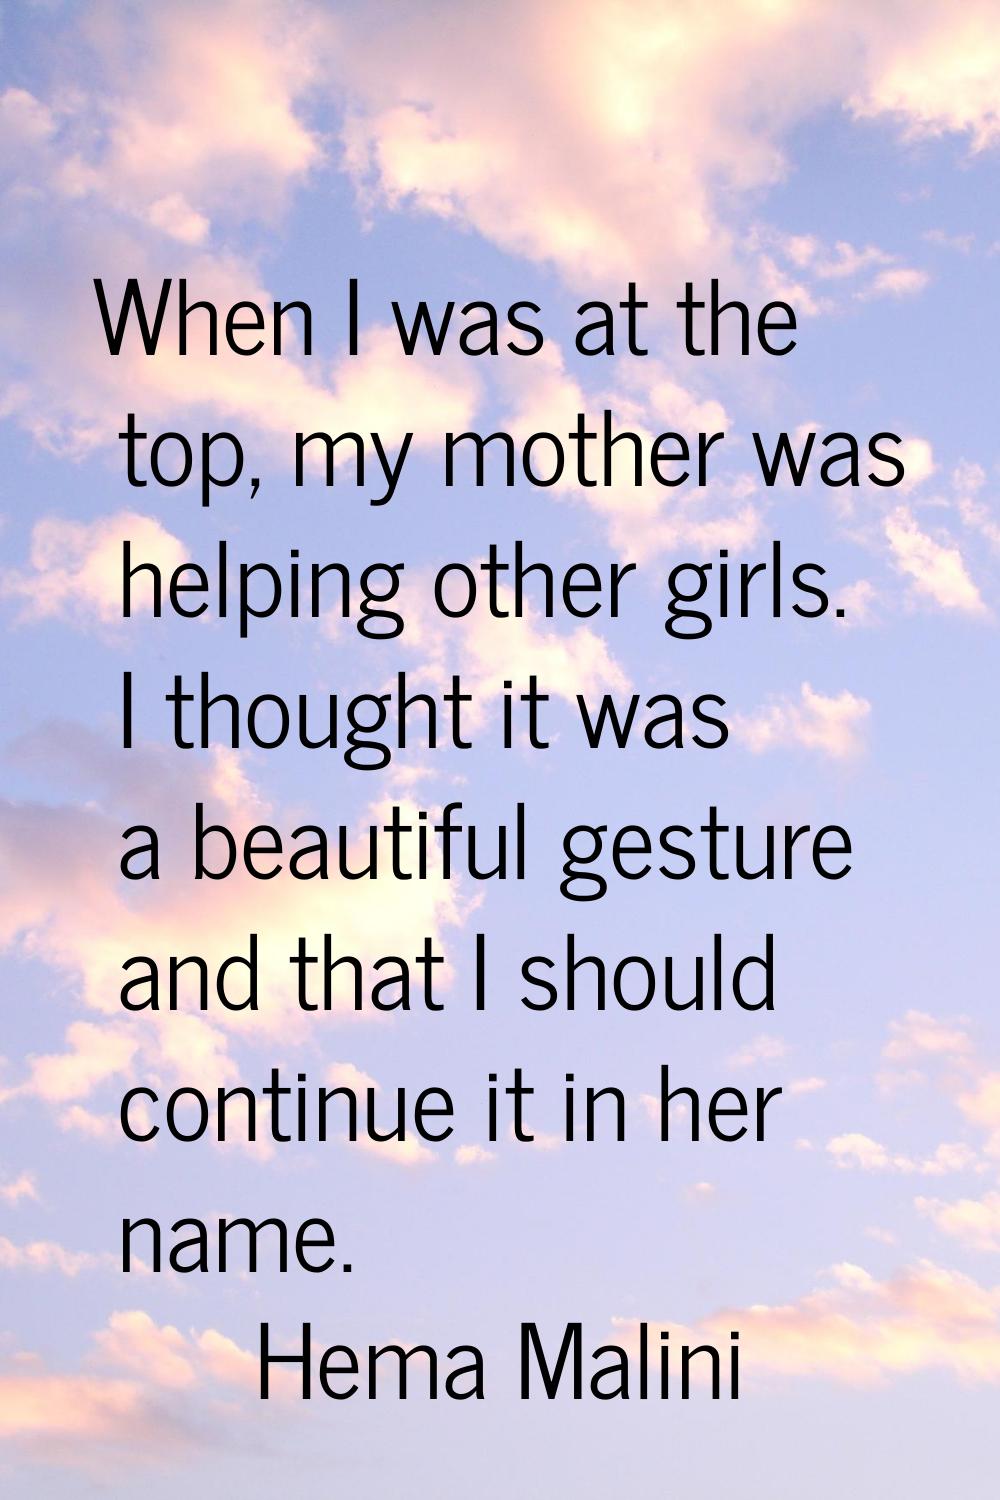 When I was at the top, my mother was helping other girls. I thought it was a beautiful gesture and 